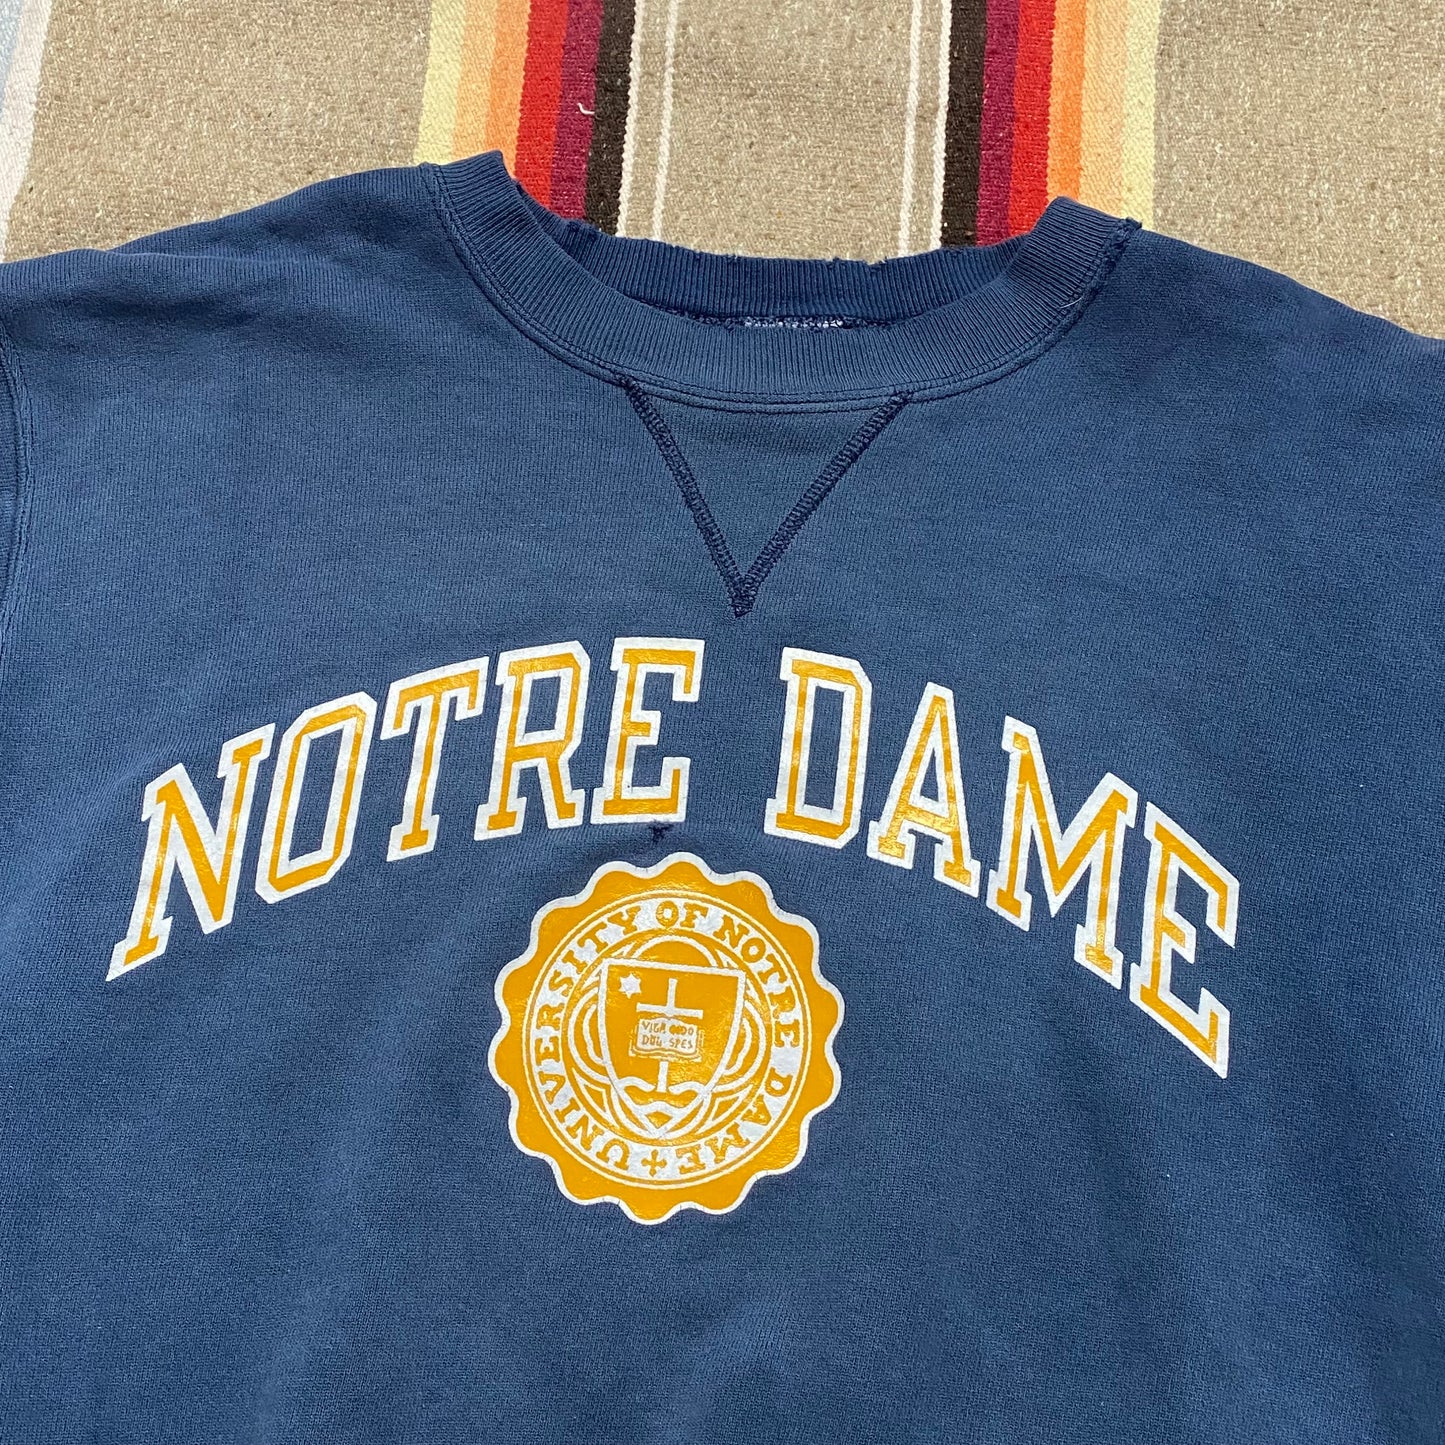 1980s Champion Notre Dame Sweatshirt Made in USA Size L